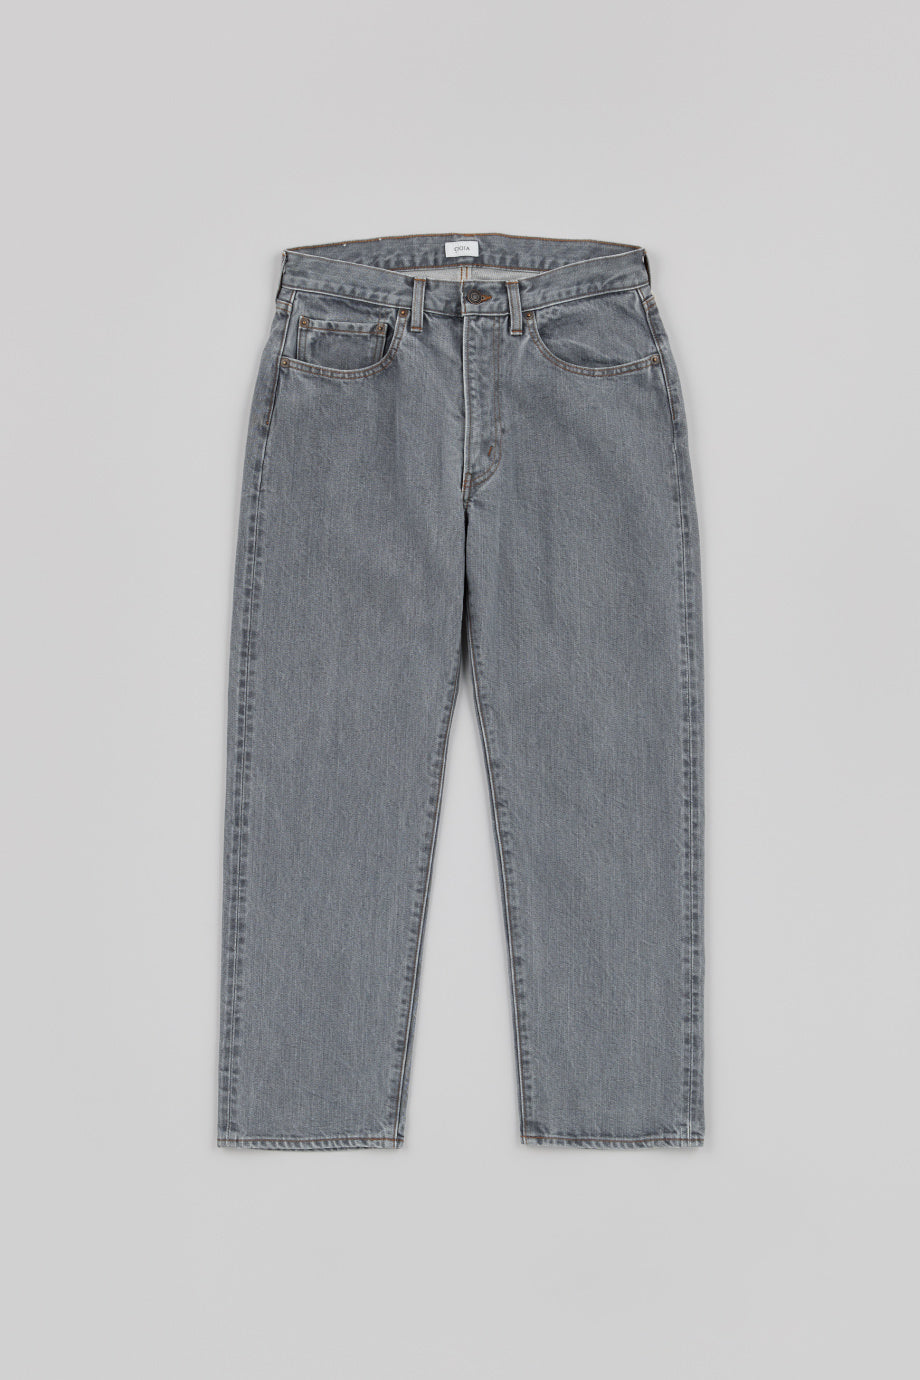 Tapered 5 Pocket Pants